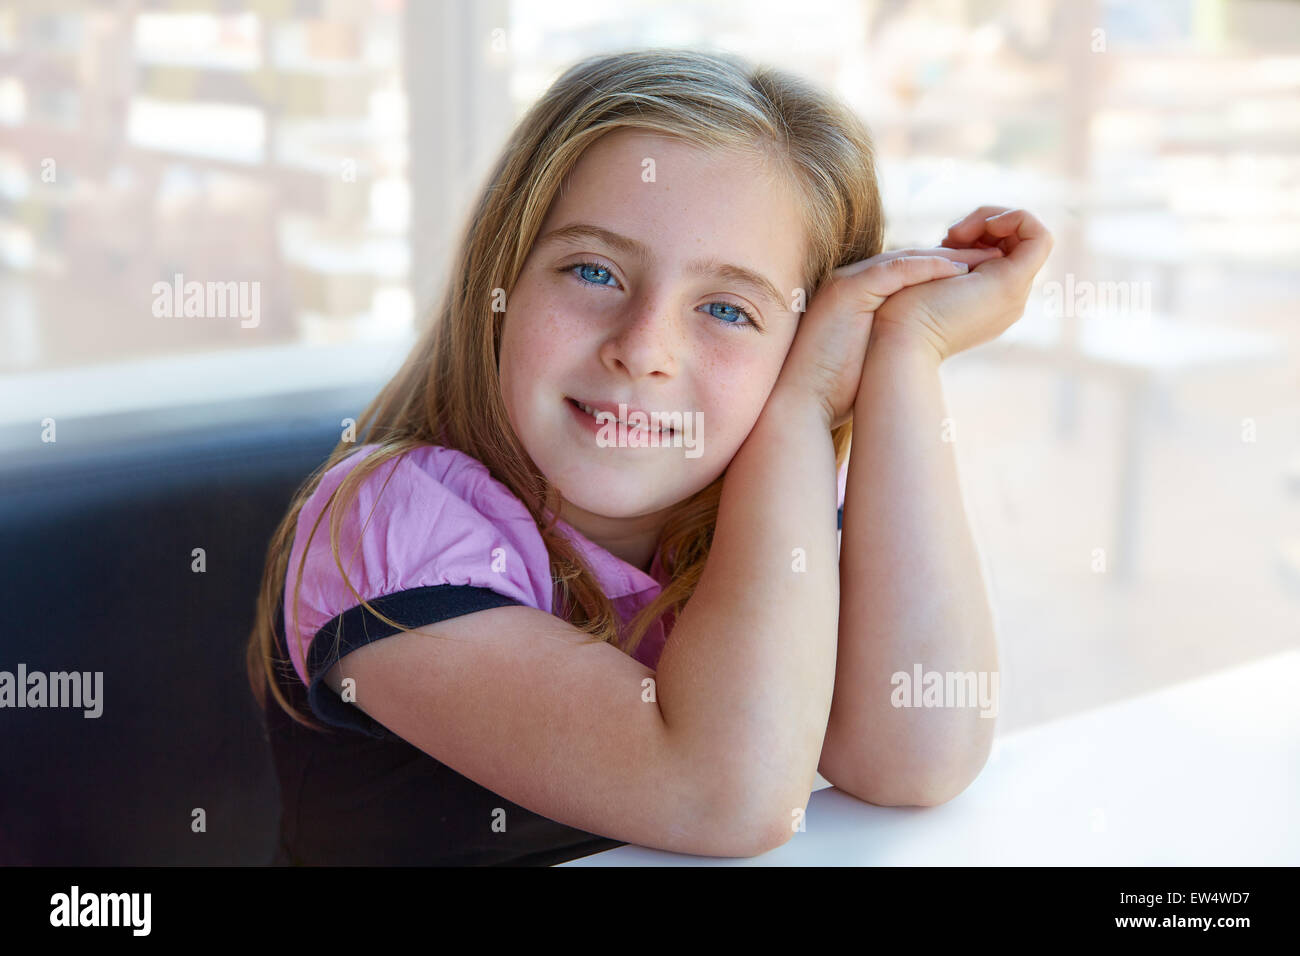 Blond relaxed happy kid girl expression blue eyes smiling Stock Photo